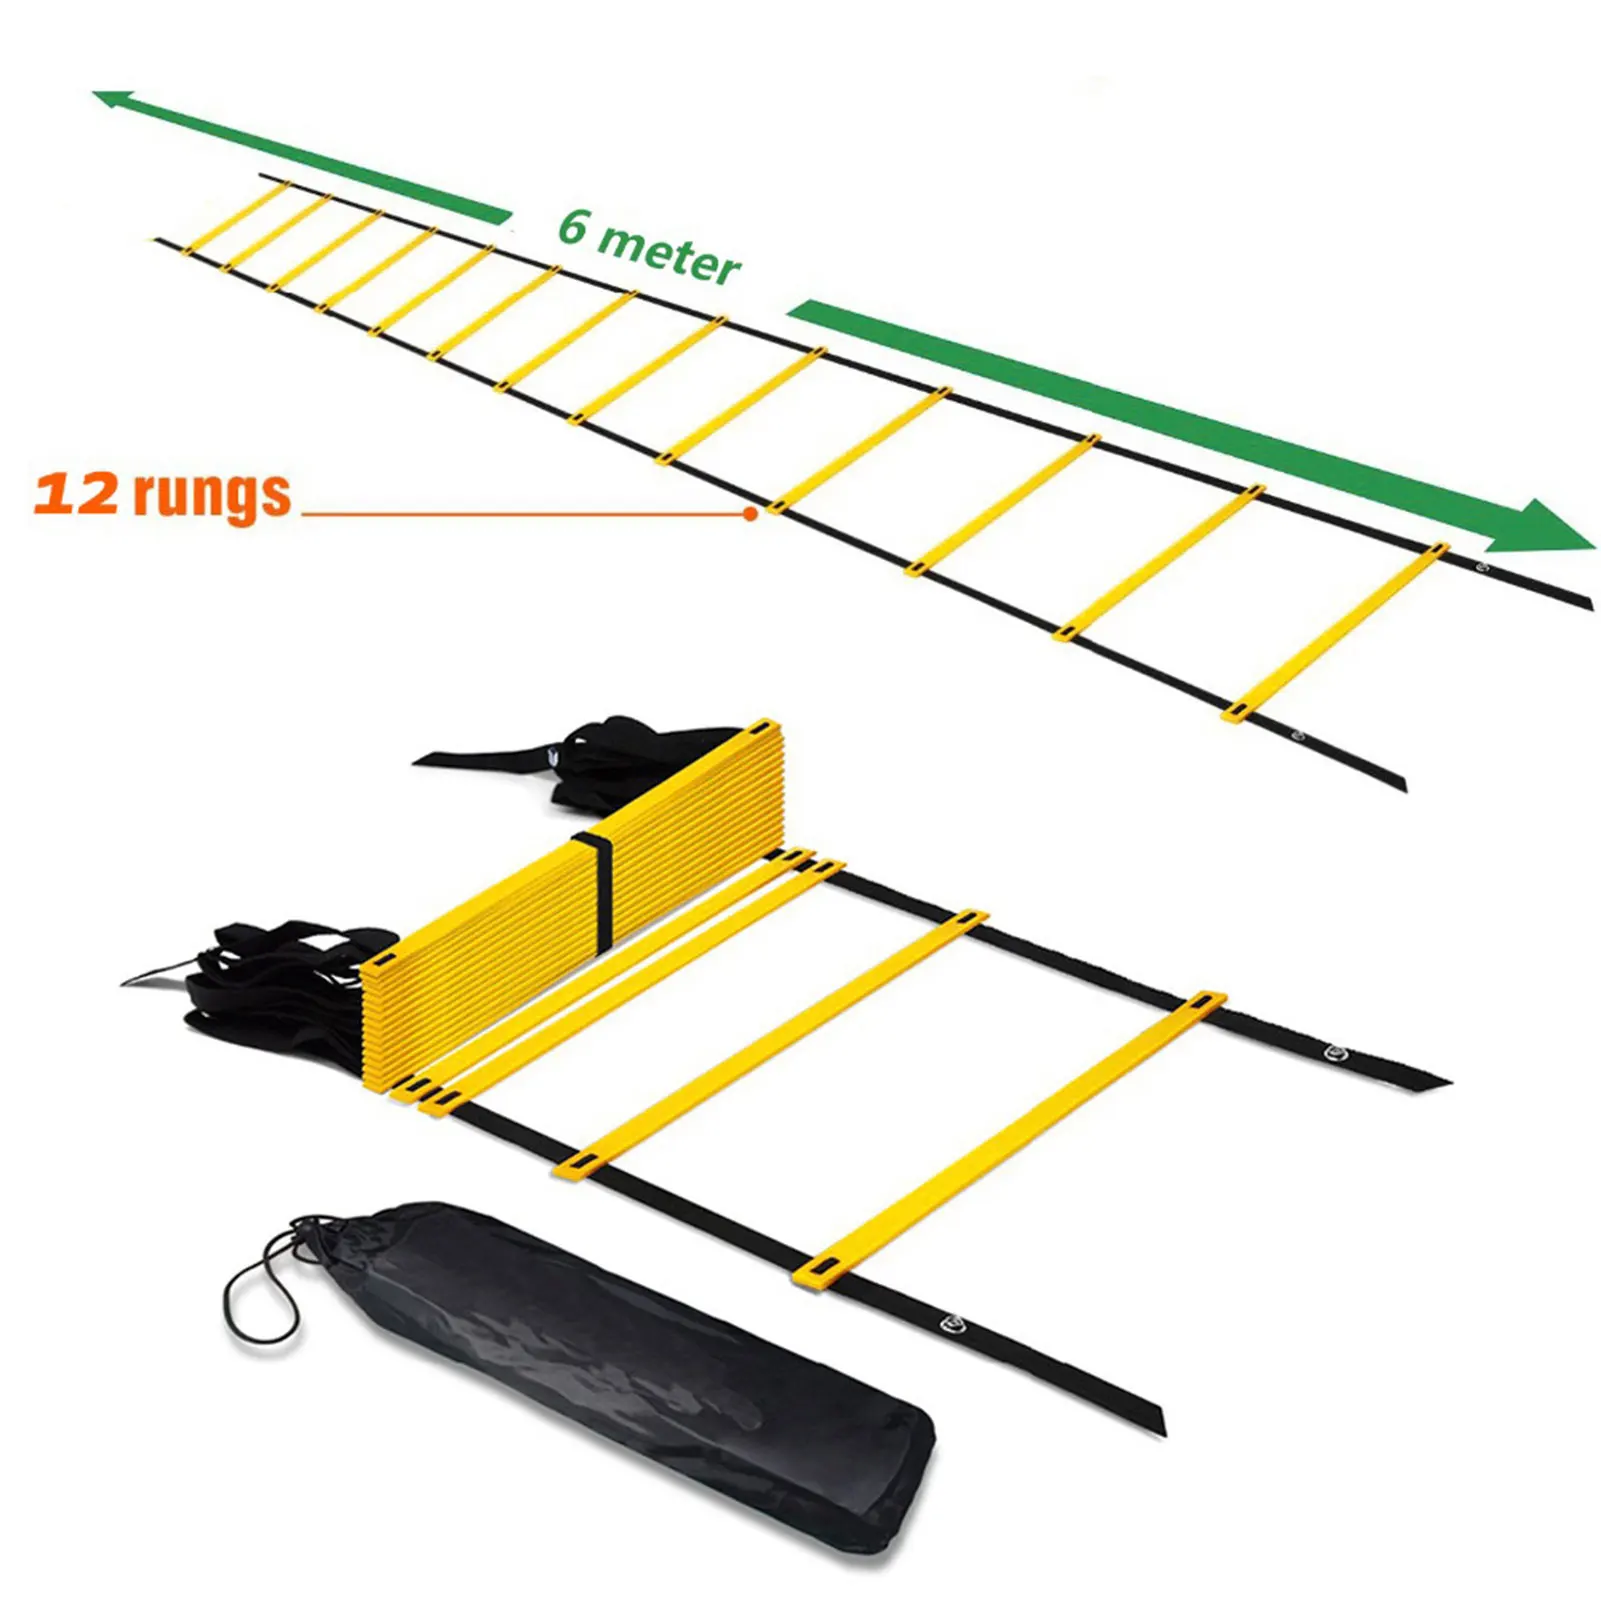 5 Speed Training Hurdle，20 ft/12 Rung Agility Ladder Speed Jump Rope and Footwork Drills Equipment 5 Latex-Free Resistance Bands Carry Bag Speed&Agility Ladder Training Set 10 Cones 